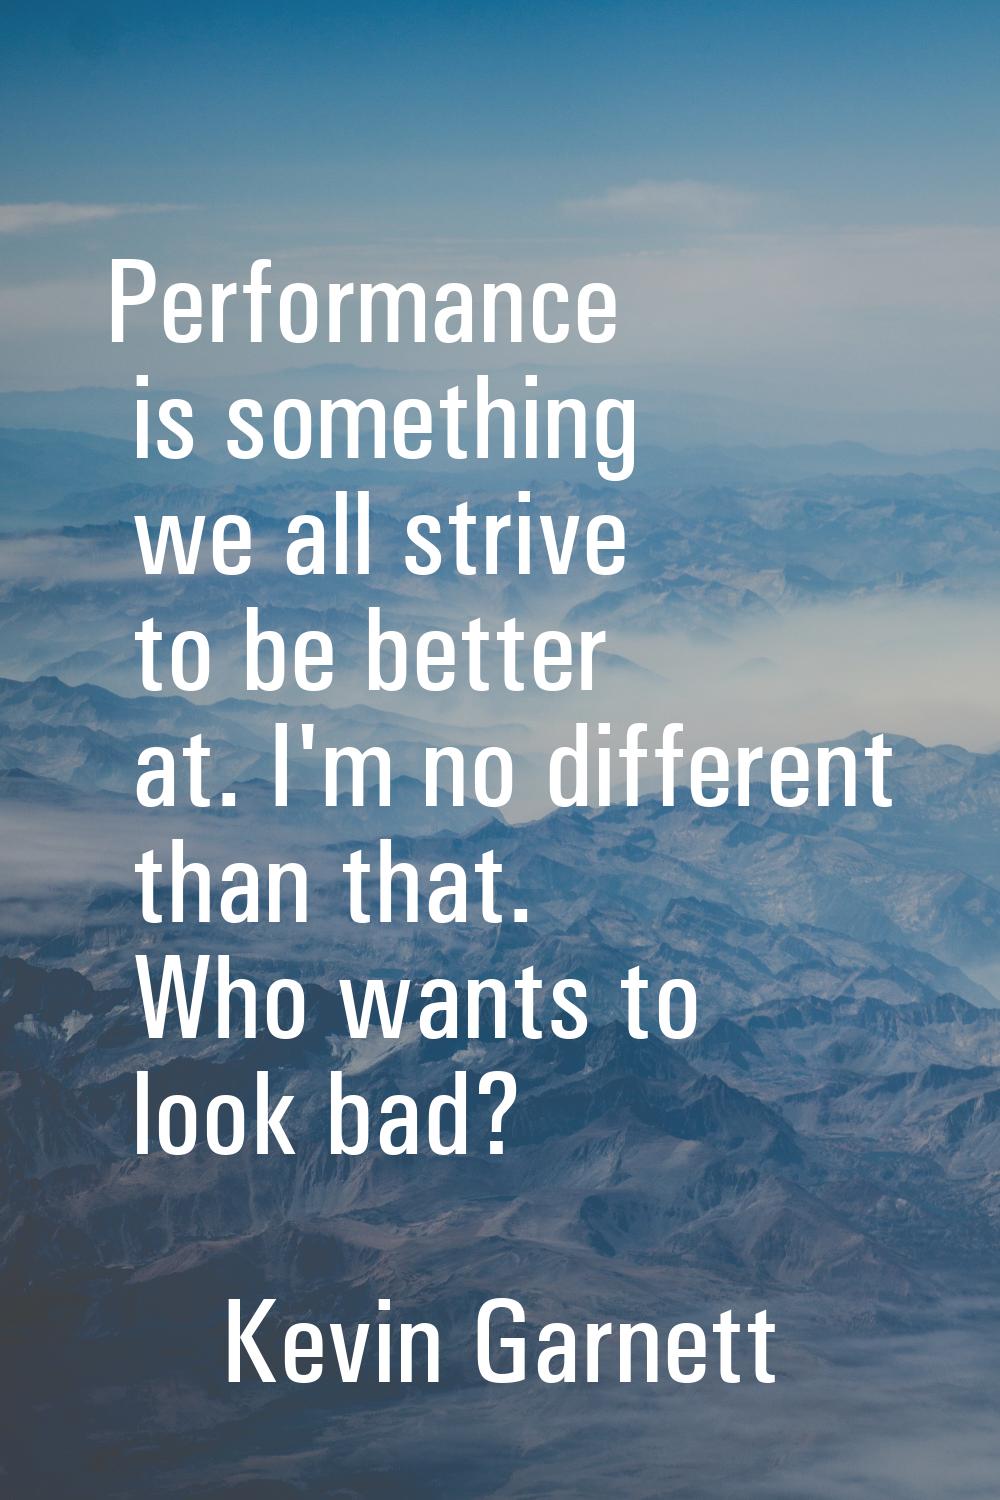 Performance is something we all strive to be better at. I'm no different than that. Who wants to lo